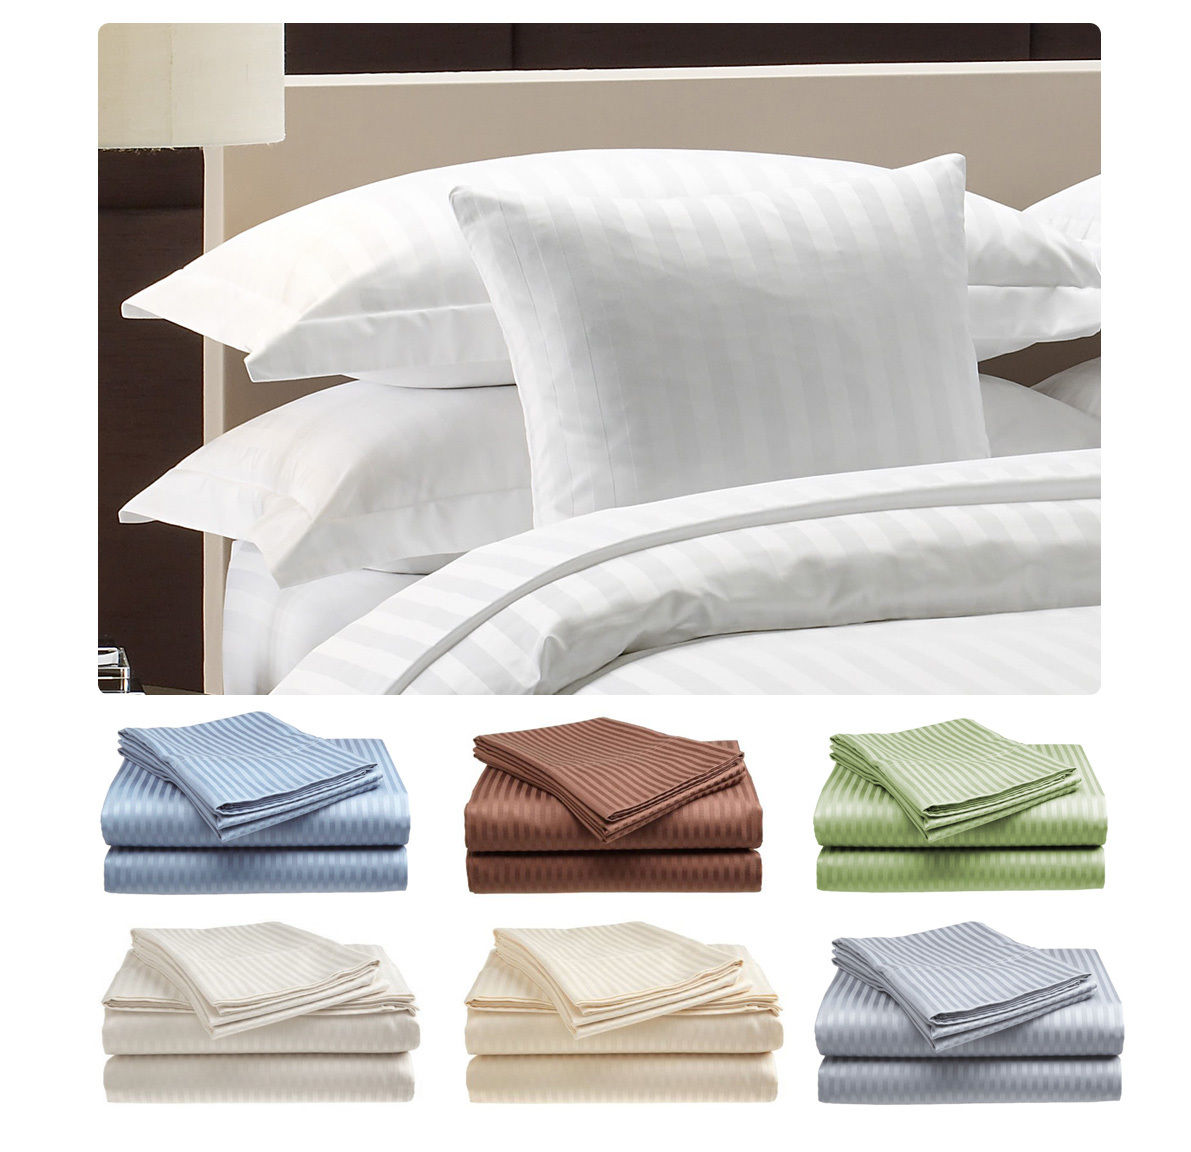 King and Queen Deluxe Hotel 300 Count Cotton Sateen Striped Sheet Only $16.99! FREE Shipping!